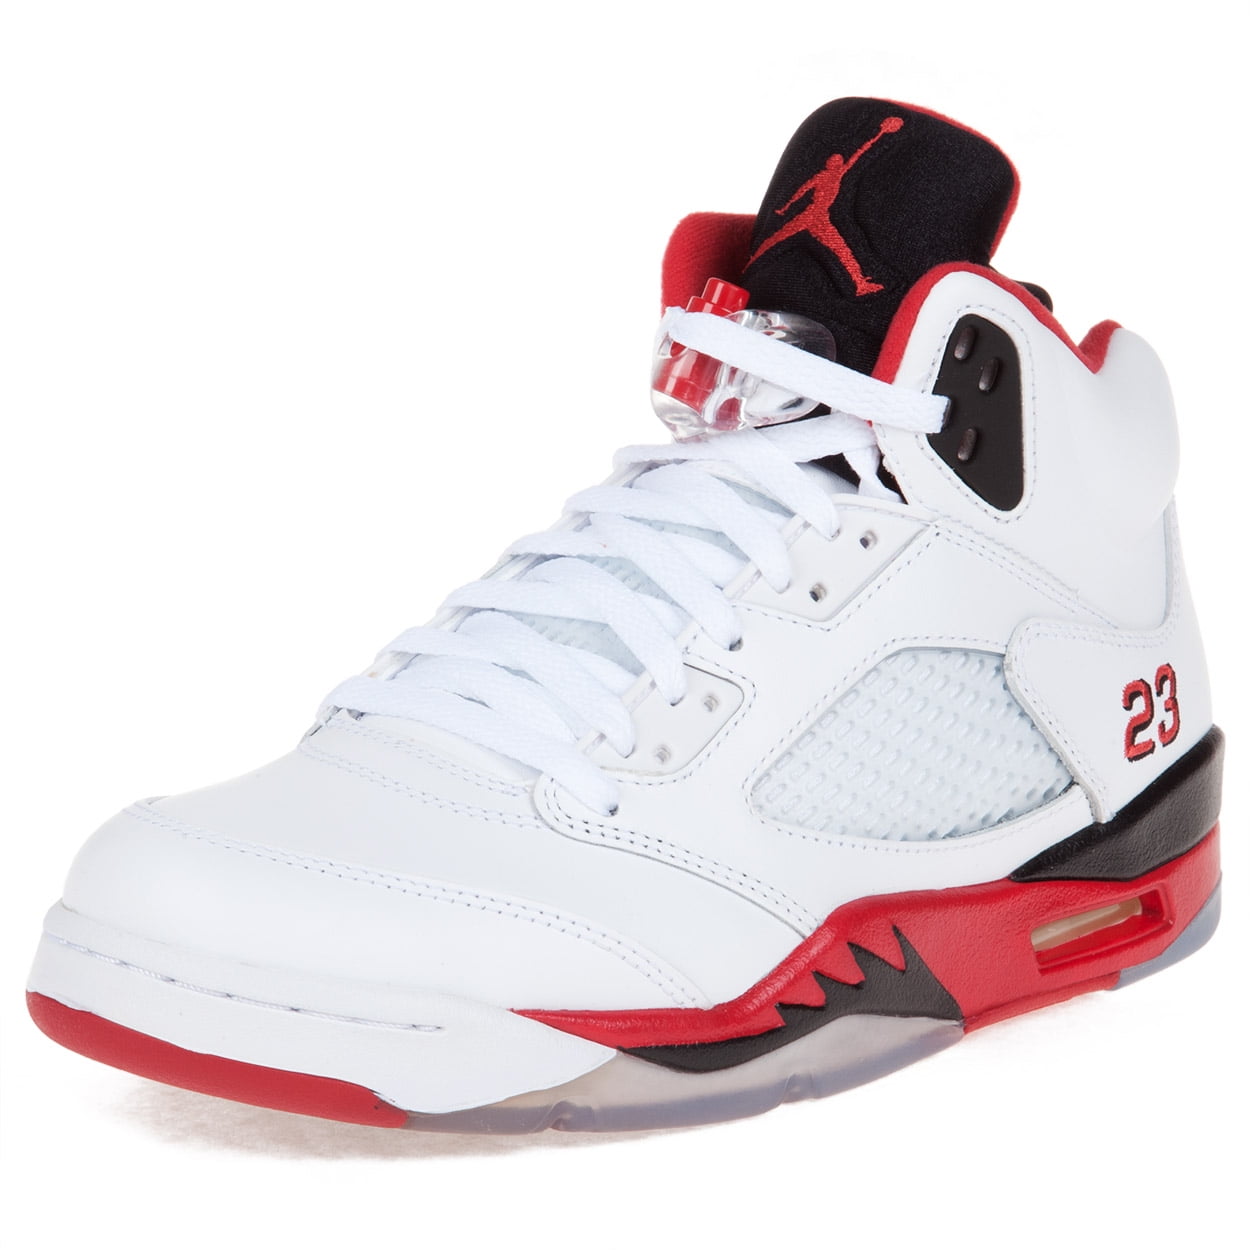 fire red 5 black tongue